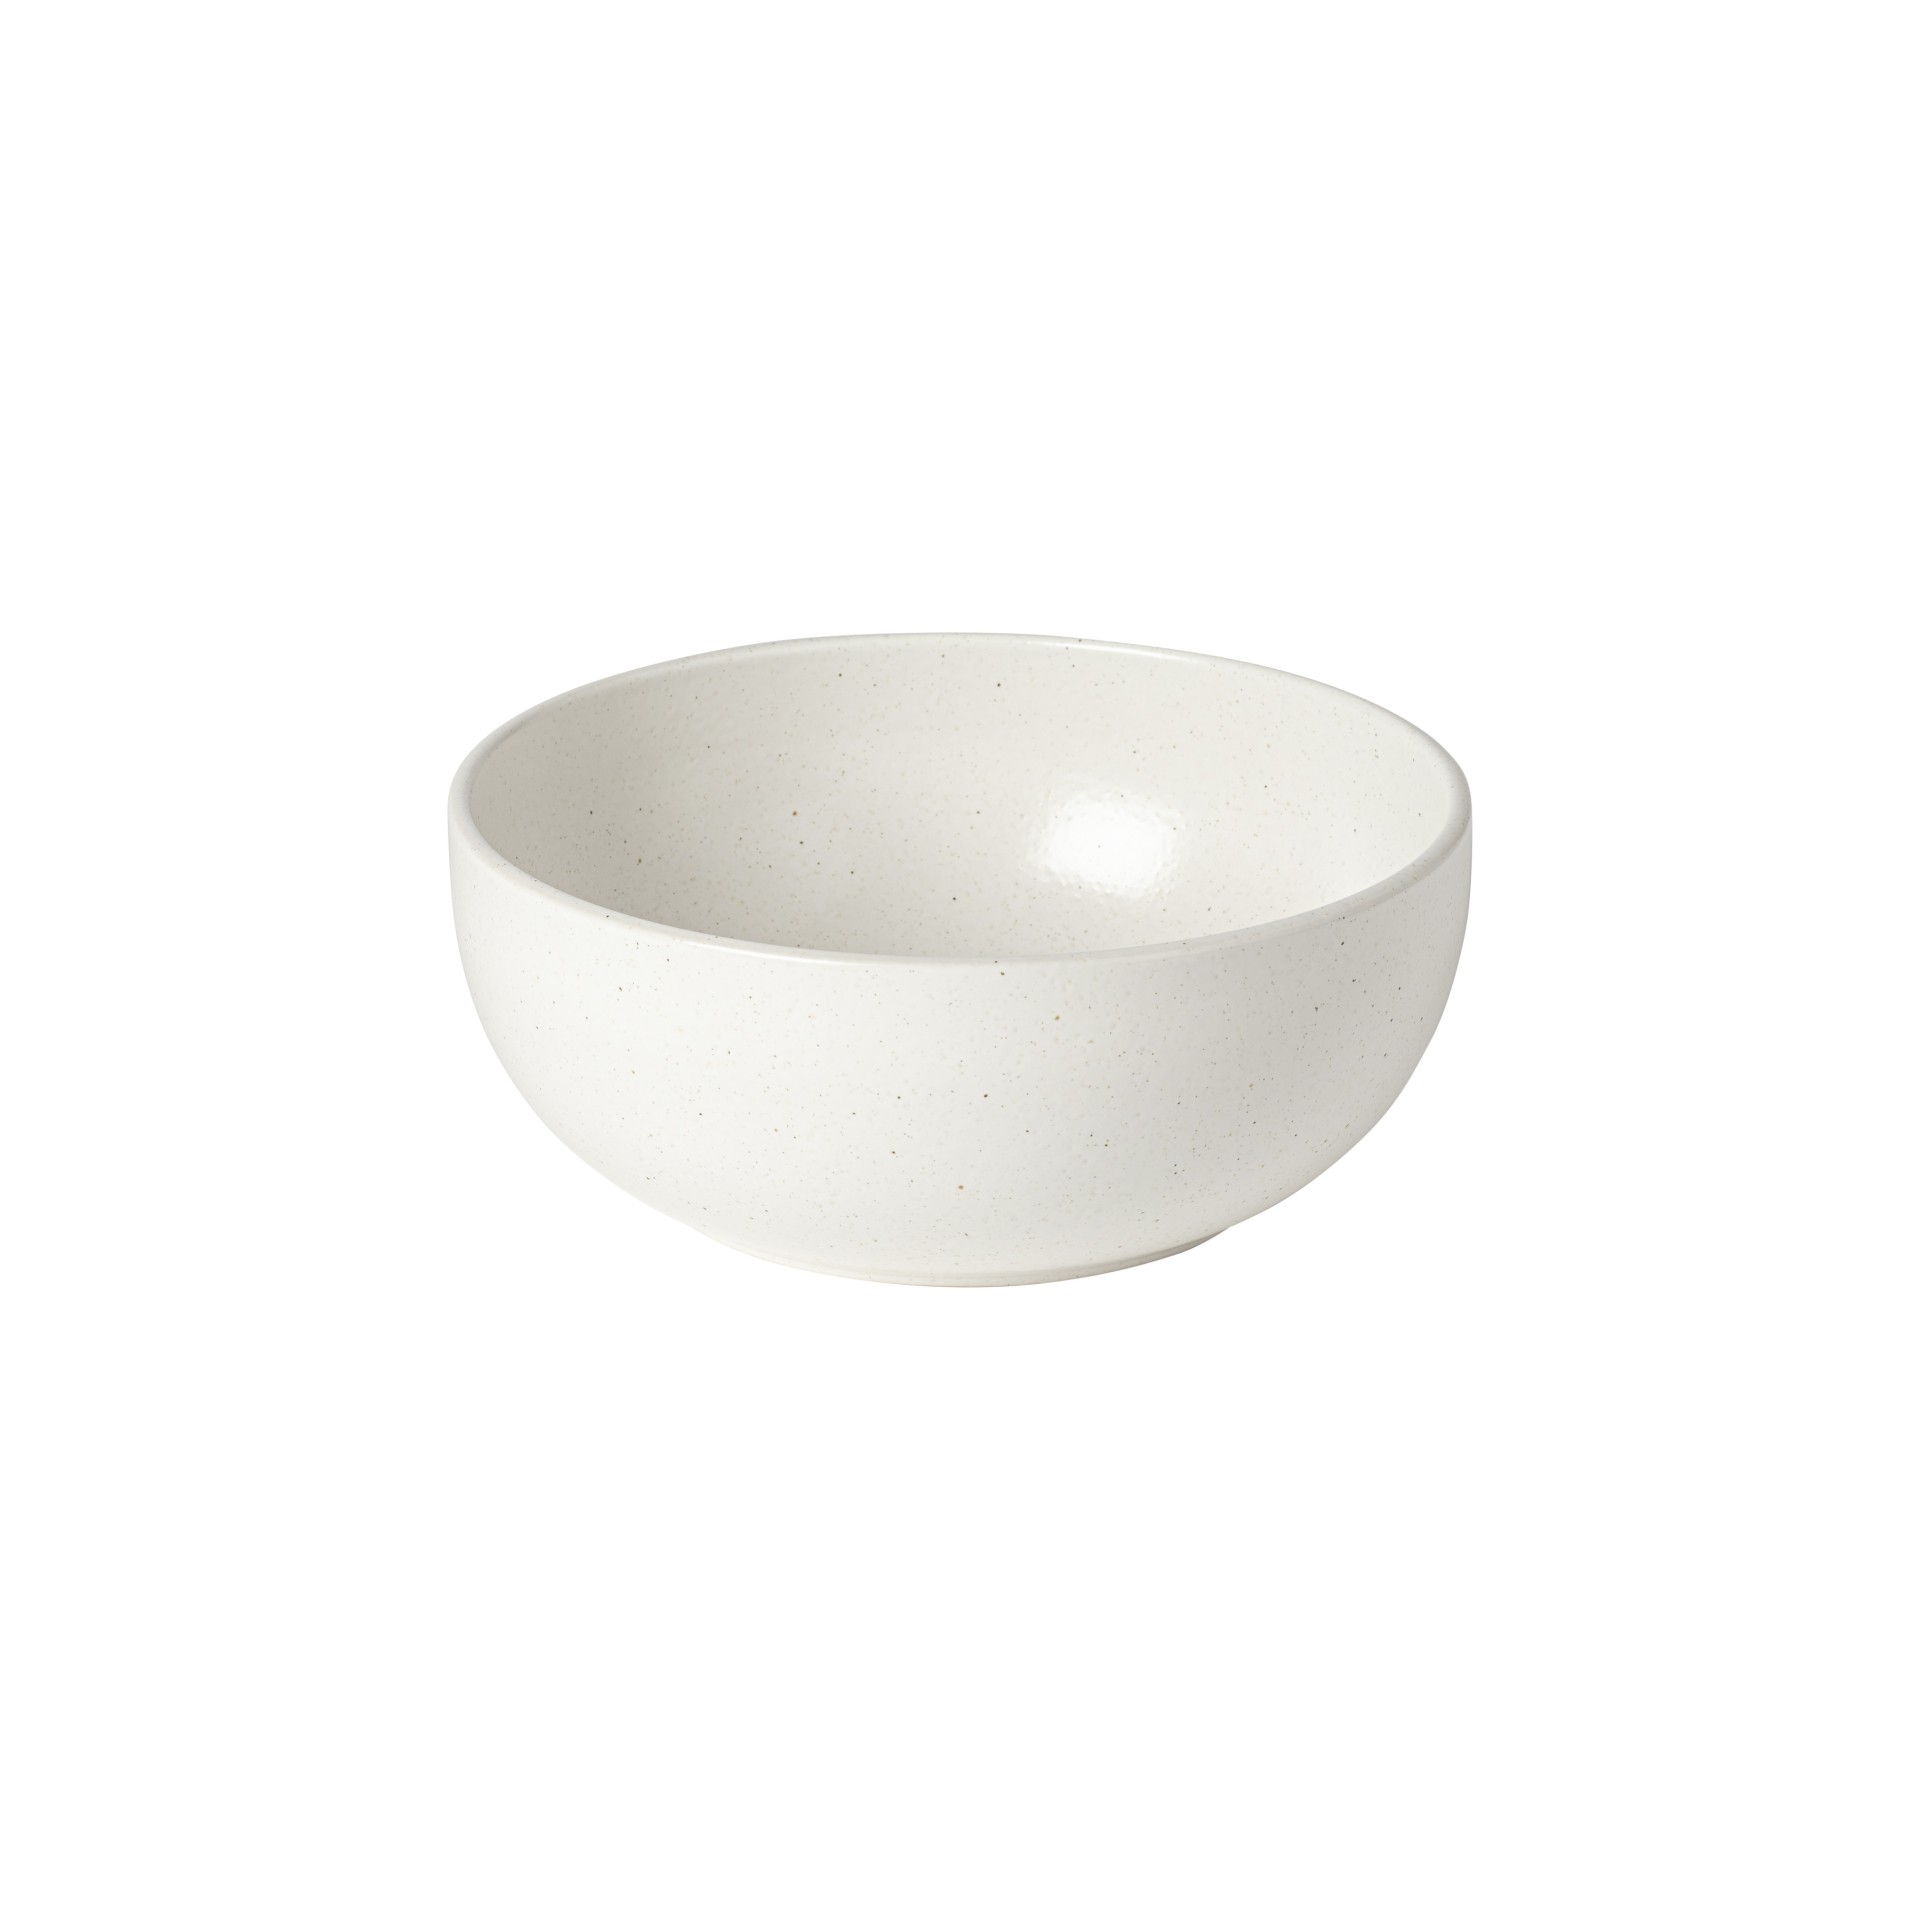 Small Serving Bowl Pacifica by Casafina